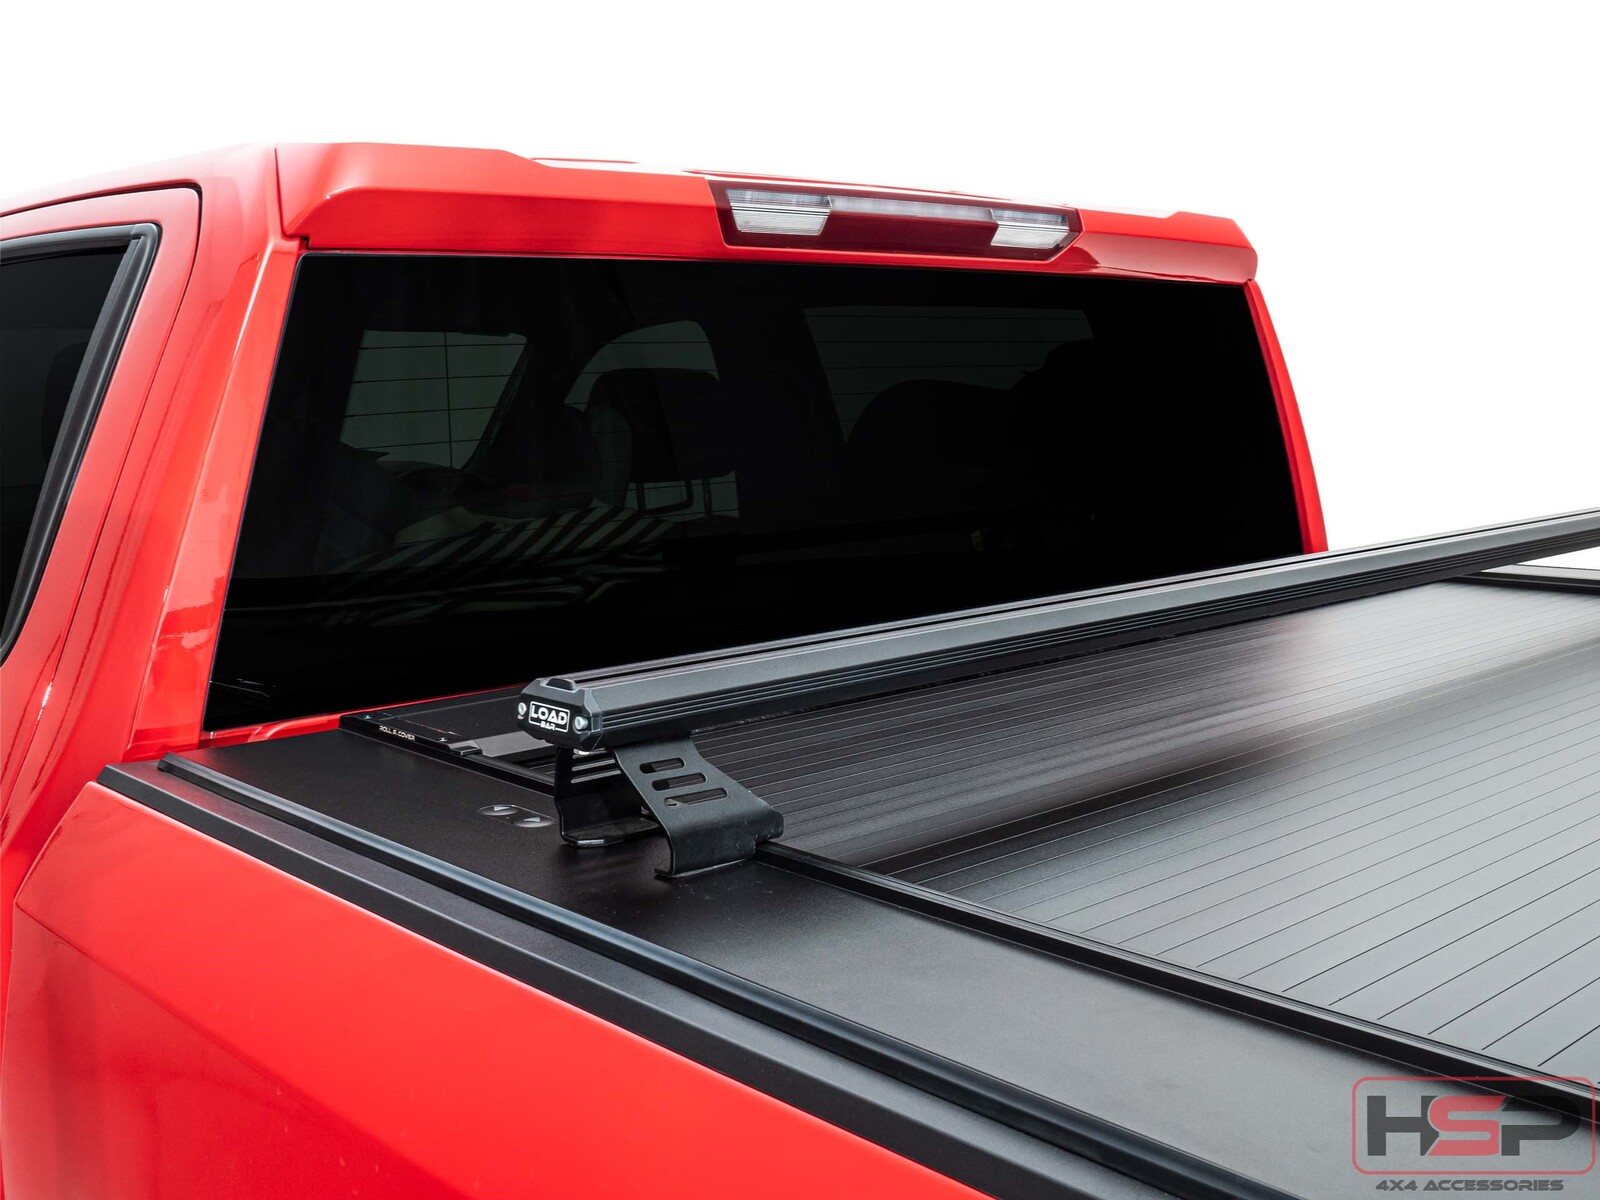 HSP Roll R Cover Series 3 to suit Silverado 1500TI 2020+ (No Sports Bar)